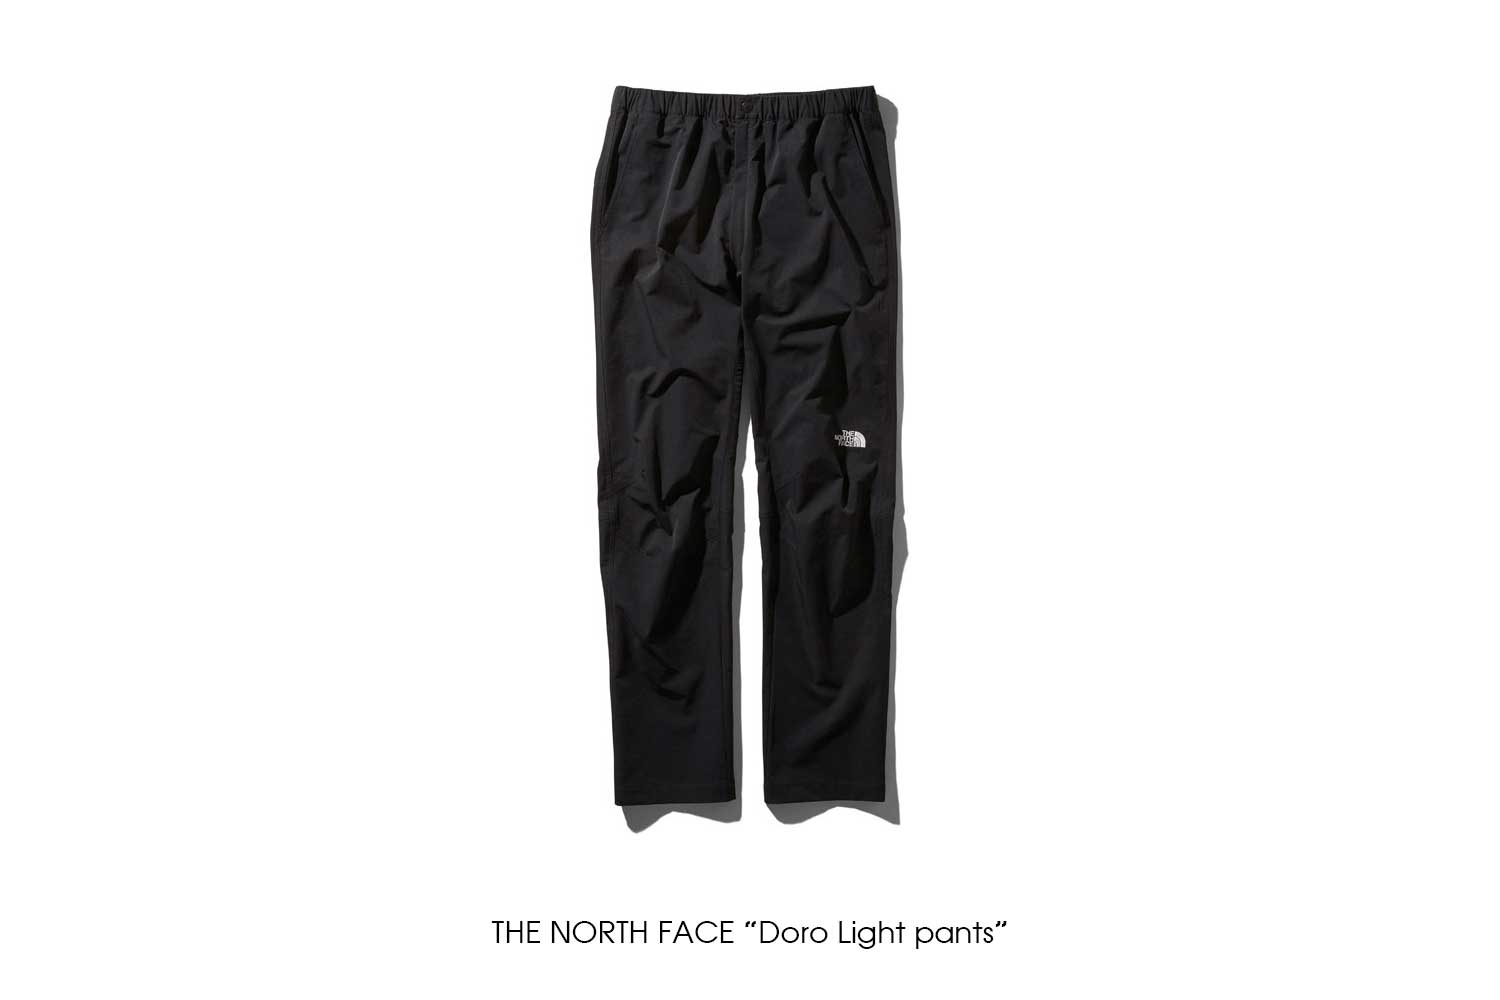 THE NORTH FACE "Doro Light Pants"